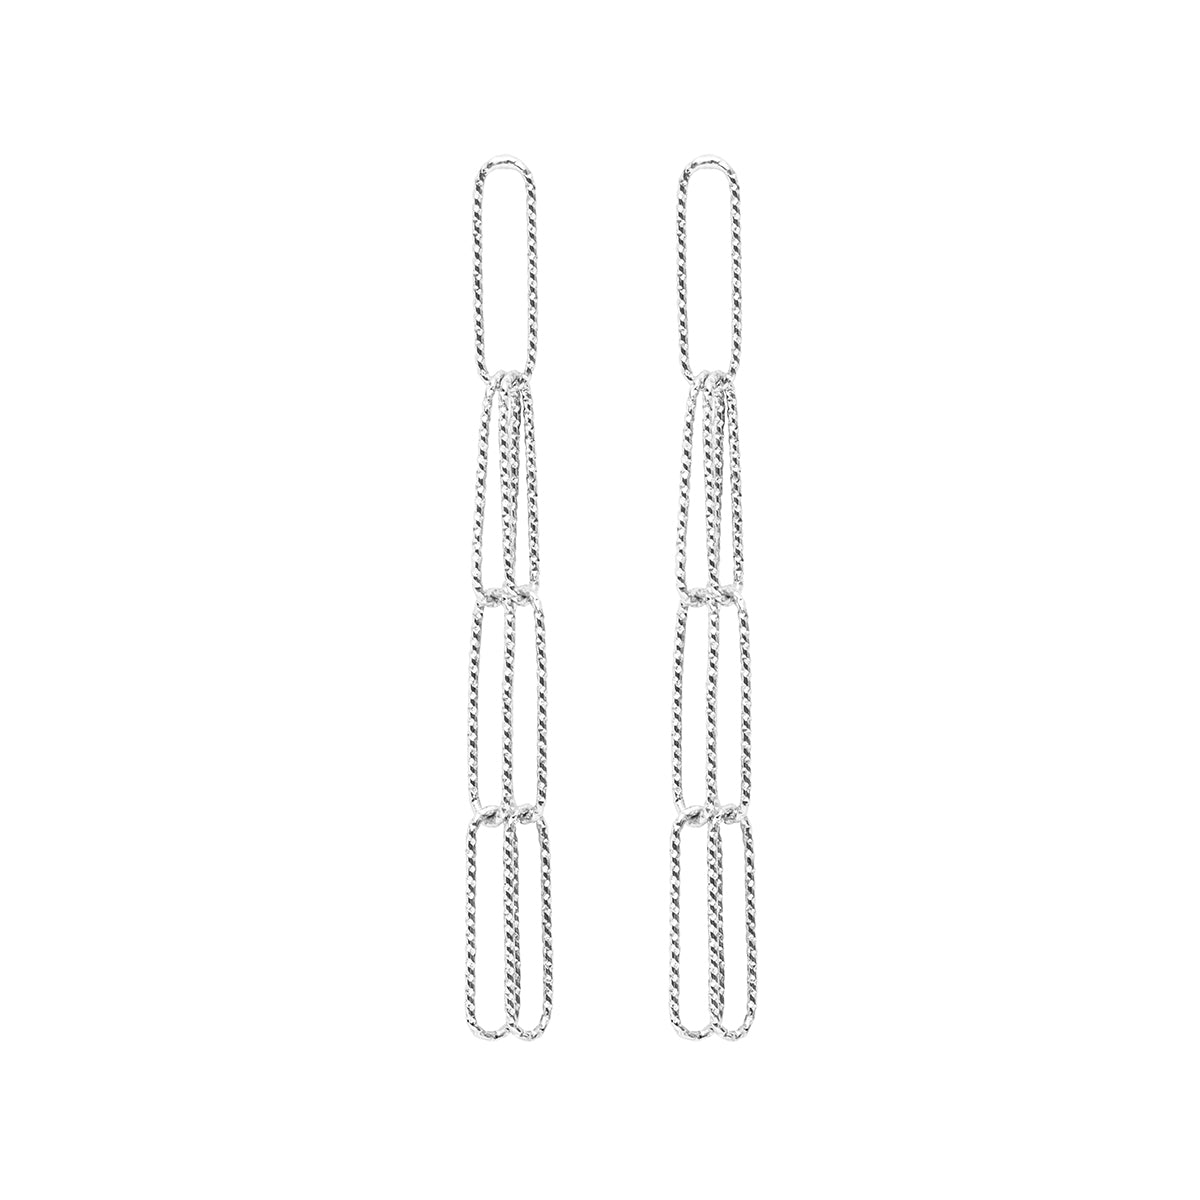 Dansk - Alyssa pin earrings, silver colour ion platinum with surgical steel 8 cm